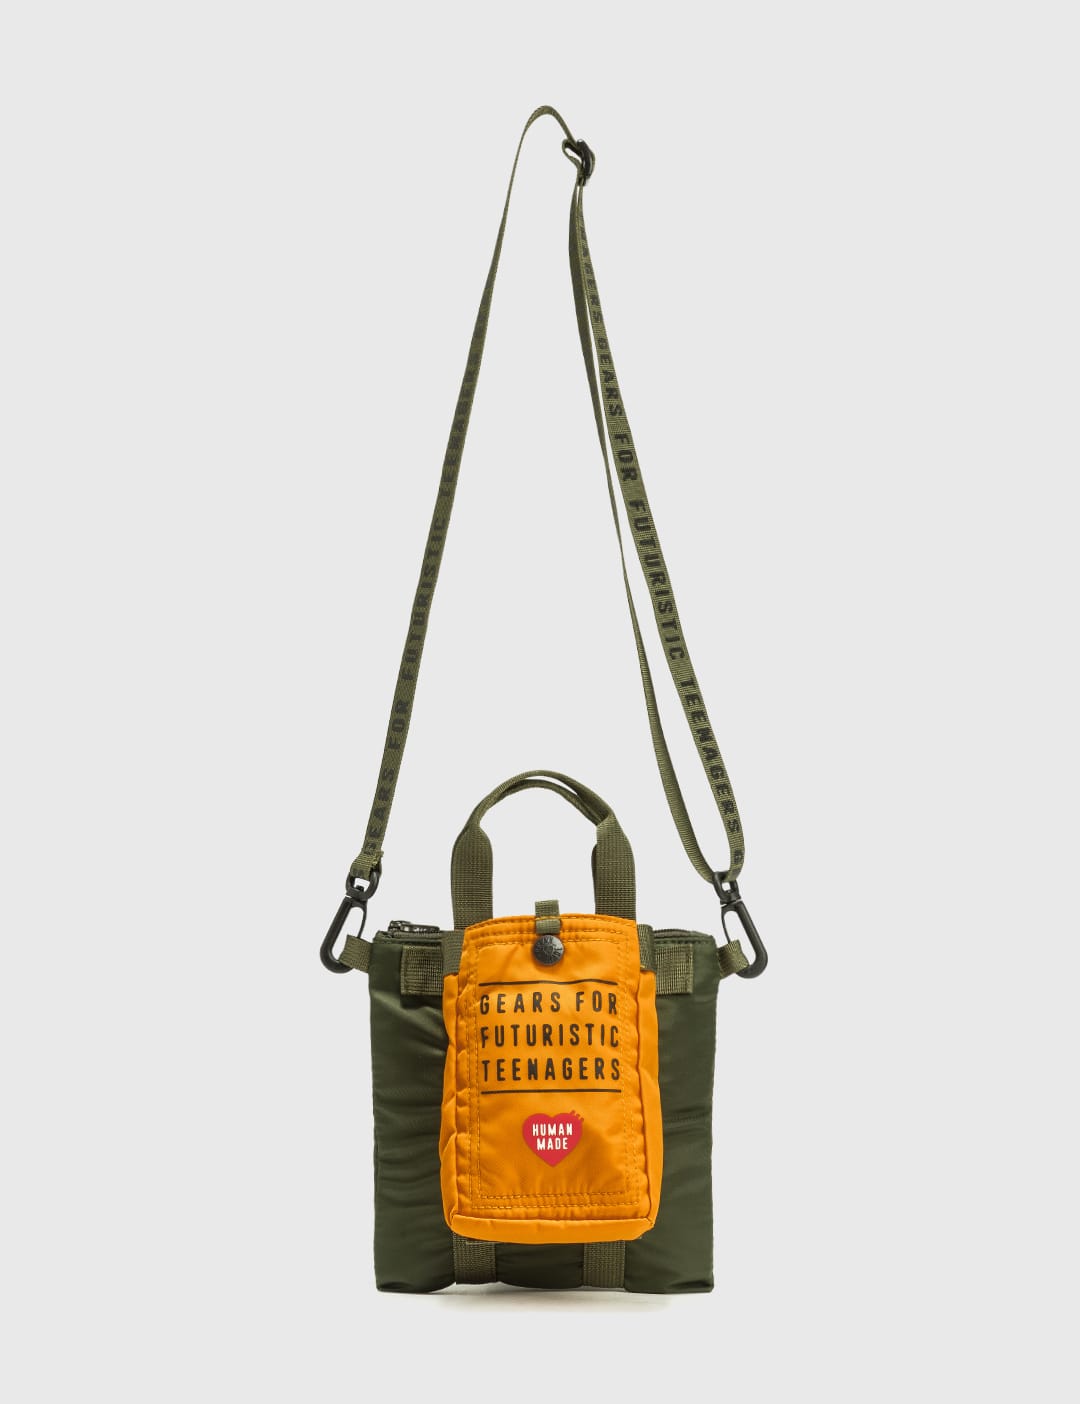 Taikan - Flanker Tote Bag | HBX - Globally Curated Fashion and 